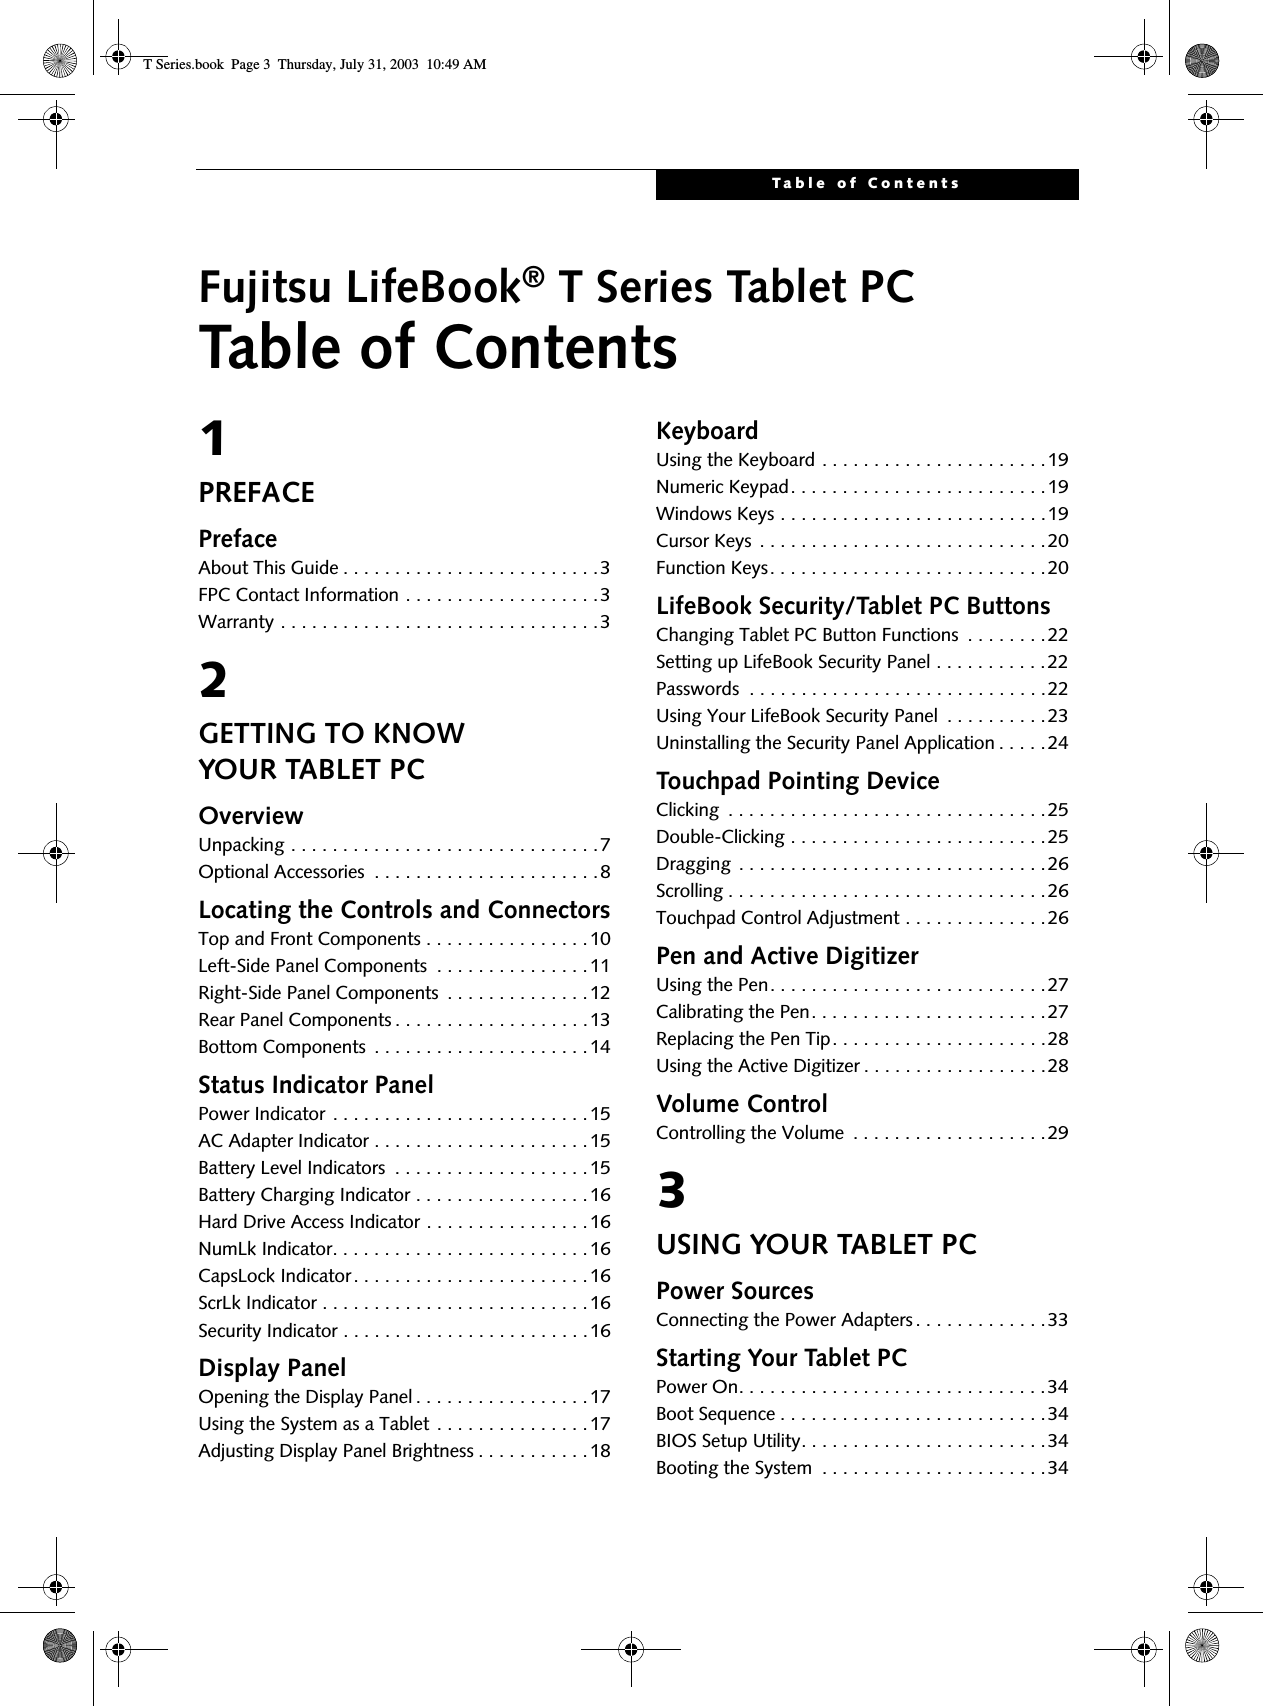 Table of ContentsFujitsu LifeBook® T Series Tablet PCTable of Contents1PREFACEPrefaceAbout This Guide . . . . . . . . . . . . . . . . . . . . . . . . .3FPC Contact Information . . . . . . . . . . . . . . . . . . .3Warranty . . . . . . . . . . . . . . . . . . . . . . . . . . . . . . .32GETTING TO KNOWYOUR TABLET PCOverviewUnpacking . . . . . . . . . . . . . . . . . . . . . . . . . . . . . .7Optional Accessories  . . . . . . . . . . . . . . . . . . . . . .8Locating the Controls and ConnectorsTop and Front Components . . . . . . . . . . . . . . . .10Left-Side Panel Components  . . . . . . . . . . . . . . .11Right-Side Panel Components  . . . . . . . . . . . . . .12Rear Panel Components . . . . . . . . . . . . . . . . . . .13Bottom Components  . . . . . . . . . . . . . . . . . . . . .14Status Indicator PanelPower Indicator . . . . . . . . . . . . . . . . . . . . . . . . .15AC Adapter Indicator . . . . . . . . . . . . . . . . . . . . .15Battery Level Indicators  . . . . . . . . . . . . . . . . . . .15Battery Charging Indicator . . . . . . . . . . . . . . . . .16Hard Drive Access Indicator . . . . . . . . . . . . . . . .16NumLk Indicator. . . . . . . . . . . . . . . . . . . . . . . . .16CapsLock Indicator. . . . . . . . . . . . . . . . . . . . . . .16ScrLk Indicator . . . . . . . . . . . . . . . . . . . . . . . . . .16Security Indicator . . . . . . . . . . . . . . . . . . . . . . . .16Display PanelOpening the Display Panel . . . . . . . . . . . . . . . . .17Using the System as a Tablet . . . . . . . . . . . . . . .17Adjusting Display Panel Brightness . . . . . . . . . . .18KeyboardUsing the Keyboard . . . . . . . . . . . . . . . . . . . . . .19Numeric Keypad. . . . . . . . . . . . . . . . . . . . . . . . .19Windows Keys . . . . . . . . . . . . . . . . . . . . . . . . . .19Cursor Keys  . . . . . . . . . . . . . . . . . . . . . . . . . . . .20Function Keys. . . . . . . . . . . . . . . . . . . . . . . . . . .20LifeBook Security/Tablet PC ButtonsChanging Tablet PC Button Functions  . . . . . . . .22Setting up LifeBook Security Panel . . . . . . . . . . .22Passwords  . . . . . . . . . . . . . . . . . . . . . . . . . . . . .22Using Your LifeBook Security Panel  . . . . . . . . . .23Uninstalling the Security Panel Application . . . . . 24Touchpad Pointing DeviceClicking  . . . . . . . . . . . . . . . . . . . . . . . . . . . . . . .25Double-Clicking . . . . . . . . . . . . . . . . . . . . . . . . .25Dragging . . . . . . . . . . . . . . . . . . . . . . . . . . . . . .26Scrolling . . . . . . . . . . . . . . . . . . . . . . . . . . . . . . .26Touchpad Control Adjustment . . . . . . . . . . . . . .26Pen and Active DigitizerUsing the Pen. . . . . . . . . . . . . . . . . . . . . . . . . . .27Calibrating the Pen. . . . . . . . . . . . . . . . . . . . . . .27Replacing the Pen Tip. . . . . . . . . . . . . . . . . . . . .28Using the Active Digitizer . . . . . . . . . . . . . . . . . .28Volume ControlControlling the Volume  . . . . . . . . . . . . . . . . . . .293USING YOUR TABLET PCPower SourcesConnecting the Power Adapters. . . . . . . . . . . . .33Starting Your Tablet PCPower On. . . . . . . . . . . . . . . . . . . . . . . . . . . . . .34Boot Sequence . . . . . . . . . . . . . . . . . . . . . . . . . .34BIOS Setup Utility. . . . . . . . . . . . . . . . . . . . . . . .34Booting the System  . . . . . . . . . . . . . . . . . . . . . .34T Series.book  Page 3  Thursday, July 31, 2003  10:49 AM